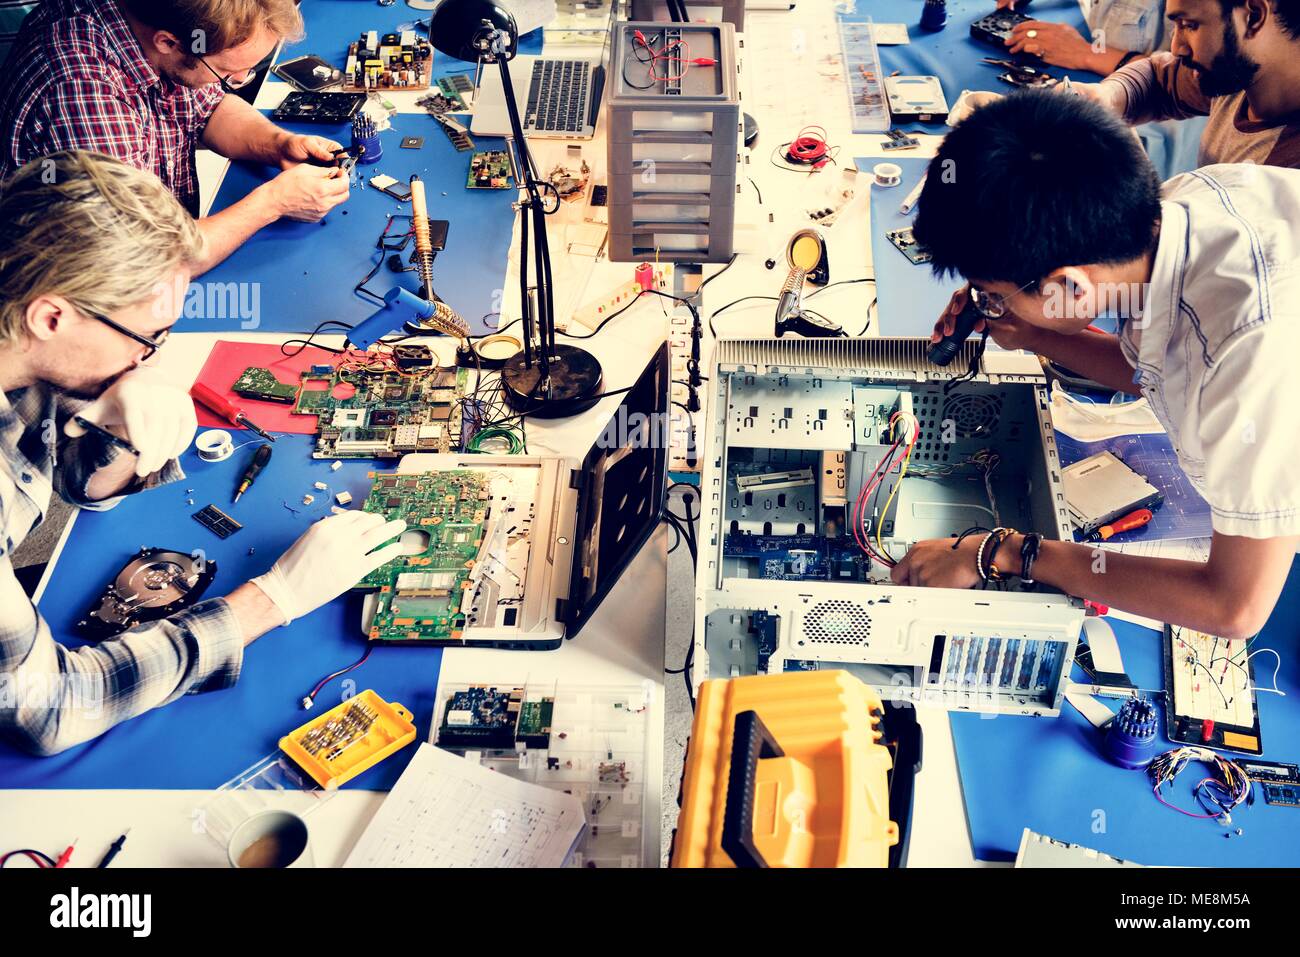 Electronics technicians team working on computer parts Stock Photo